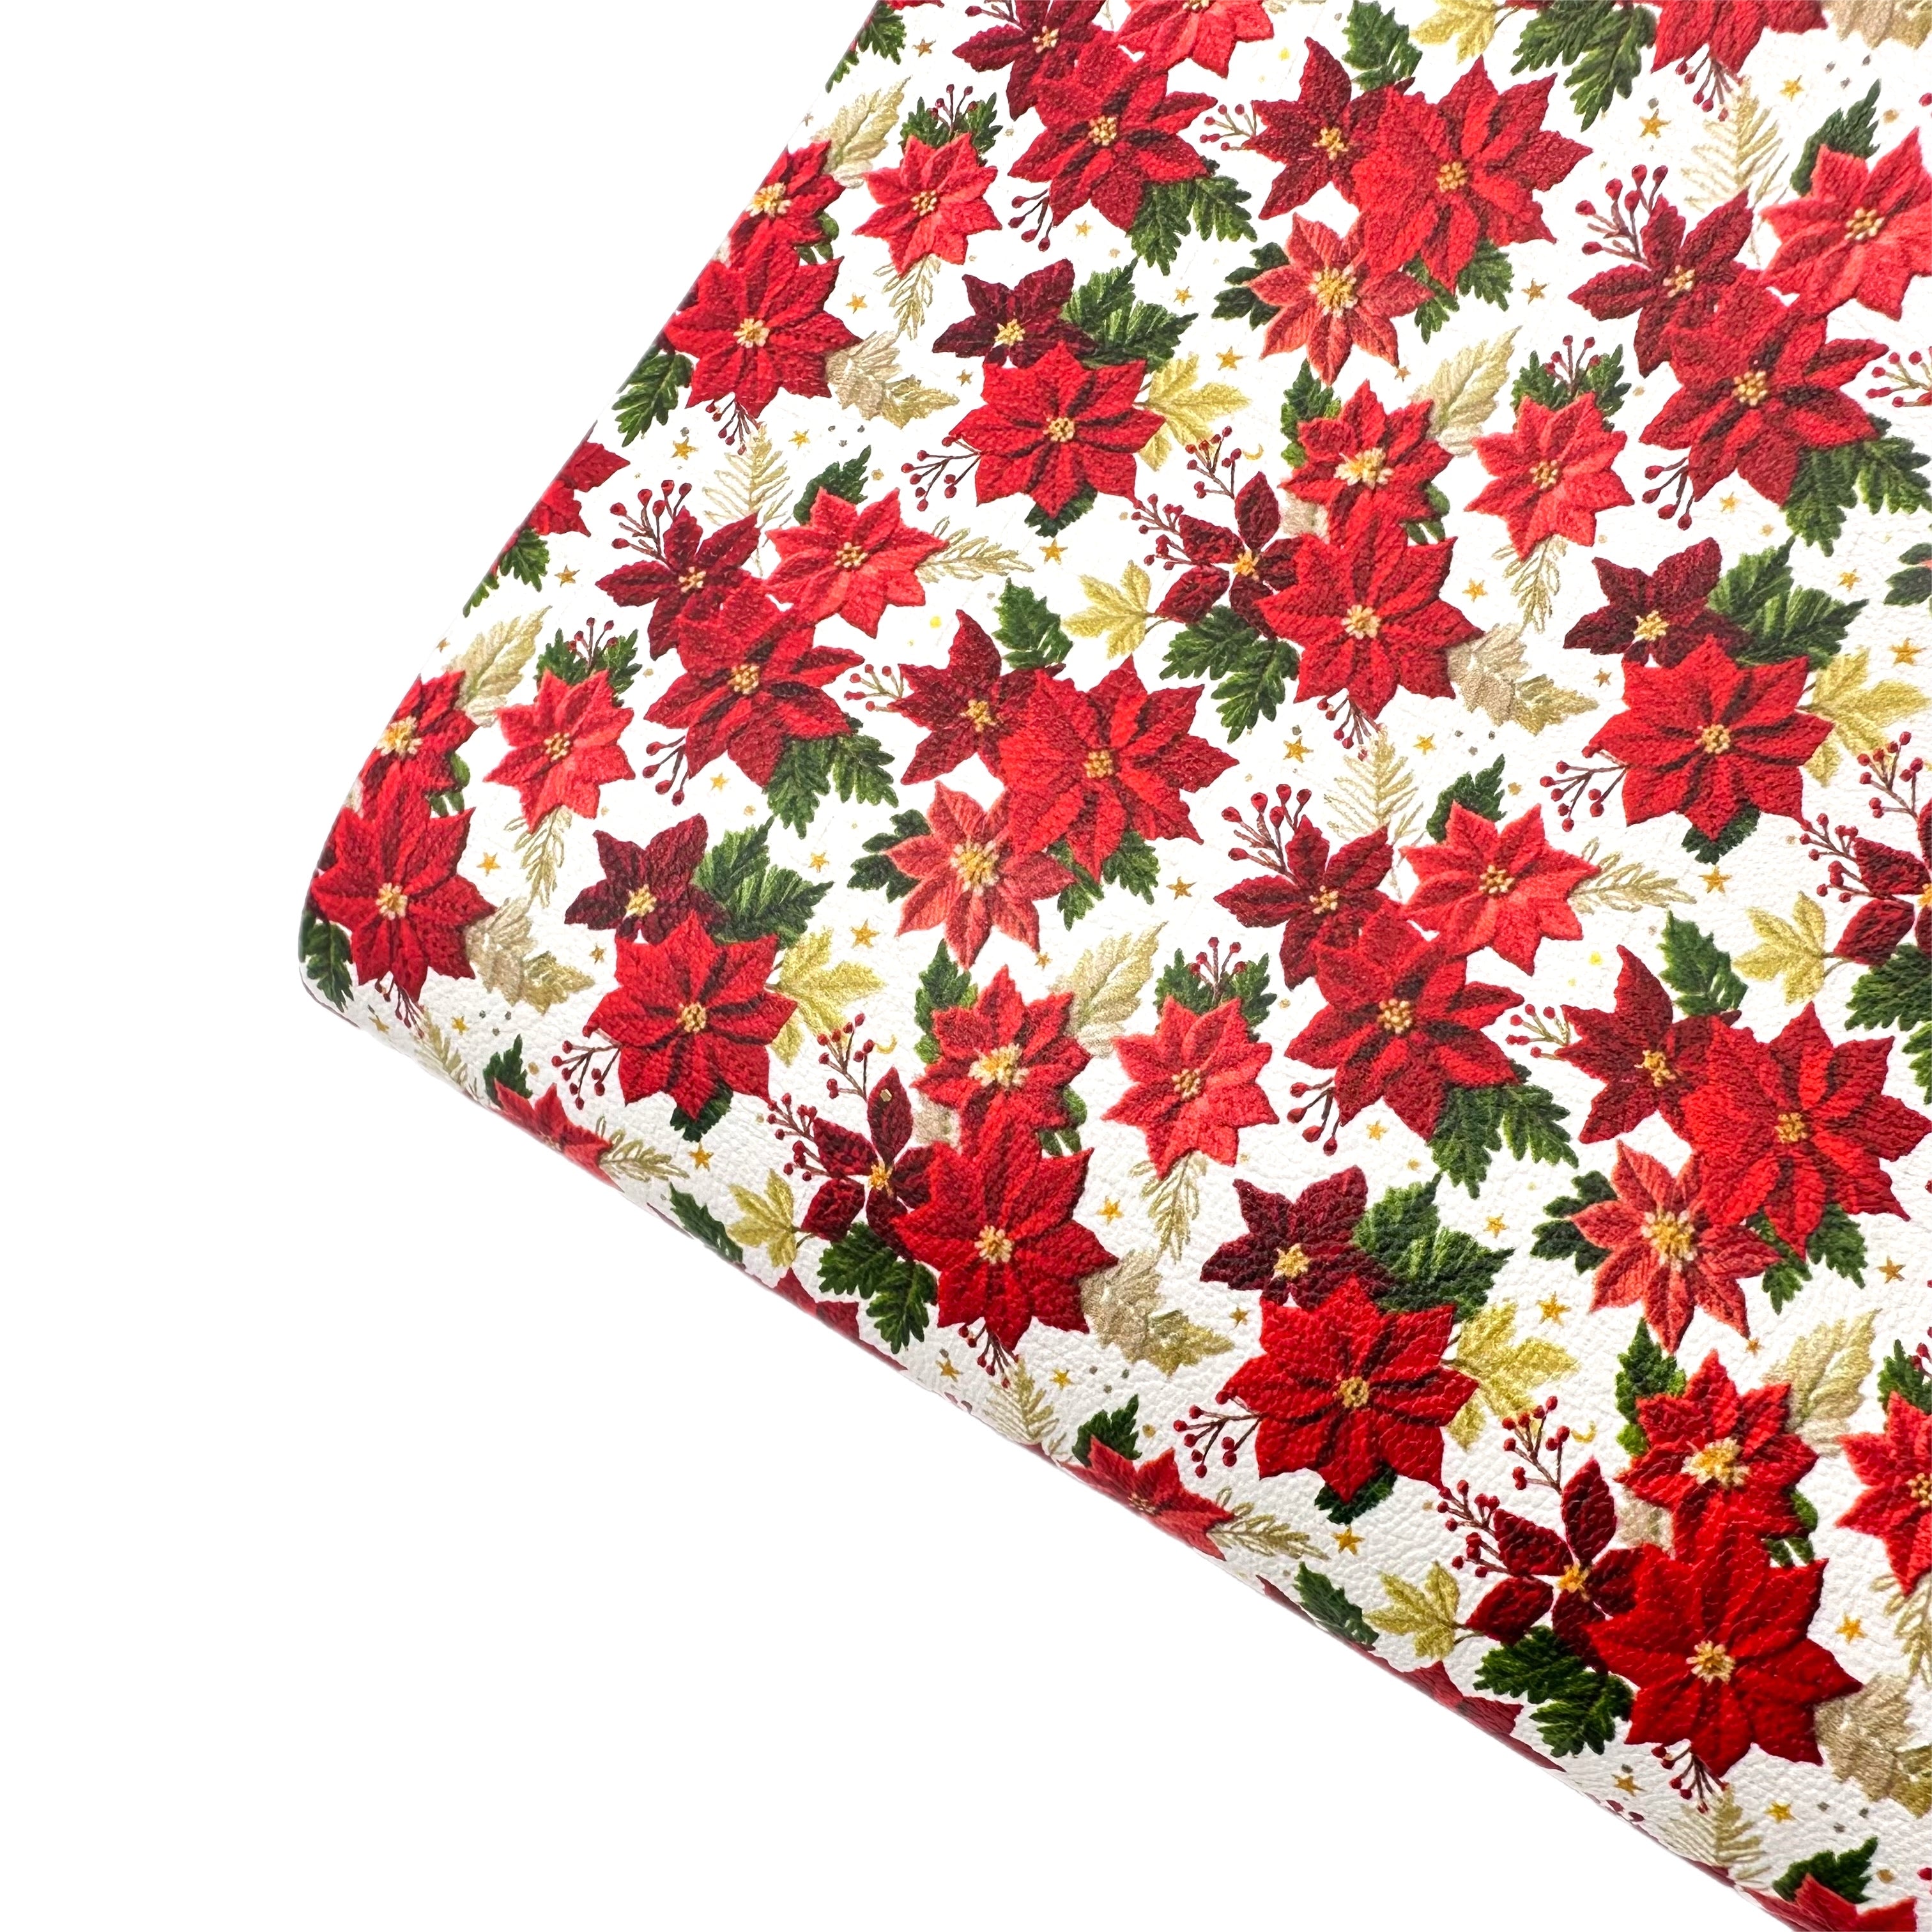 Embroidered Poinsettias Premium Faux Leather Fabric Sheets